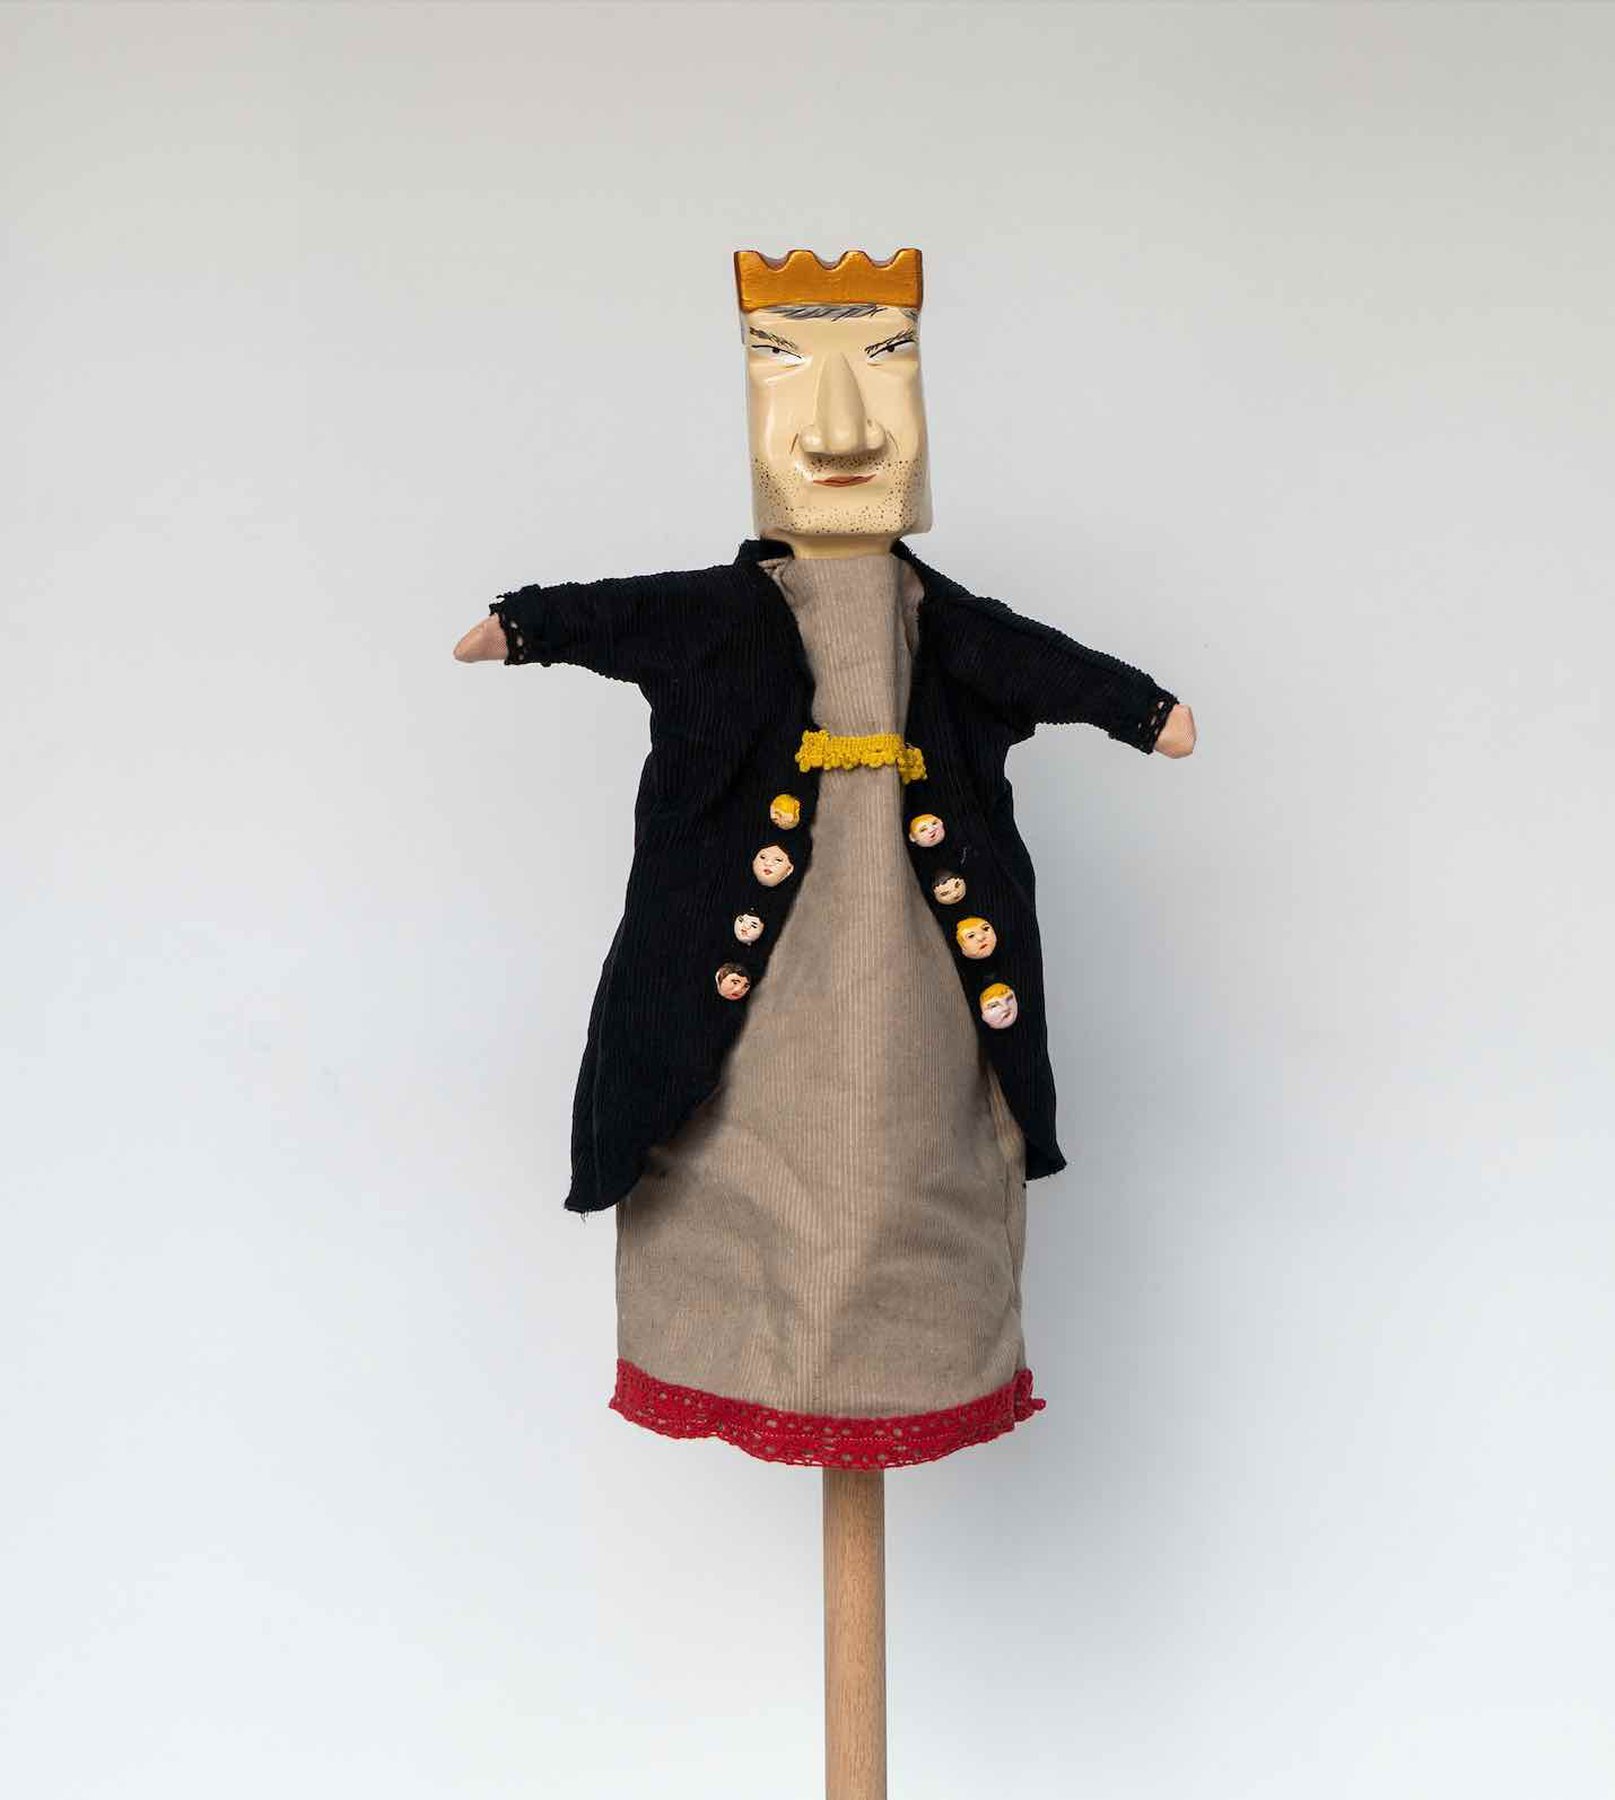 Daniela Ortiz, The Brightness of Greedy Europe, 2022, wood hand-carved, sewn, knitted and embroidered costumes (25 cm) puppet - Prince Andrew of York